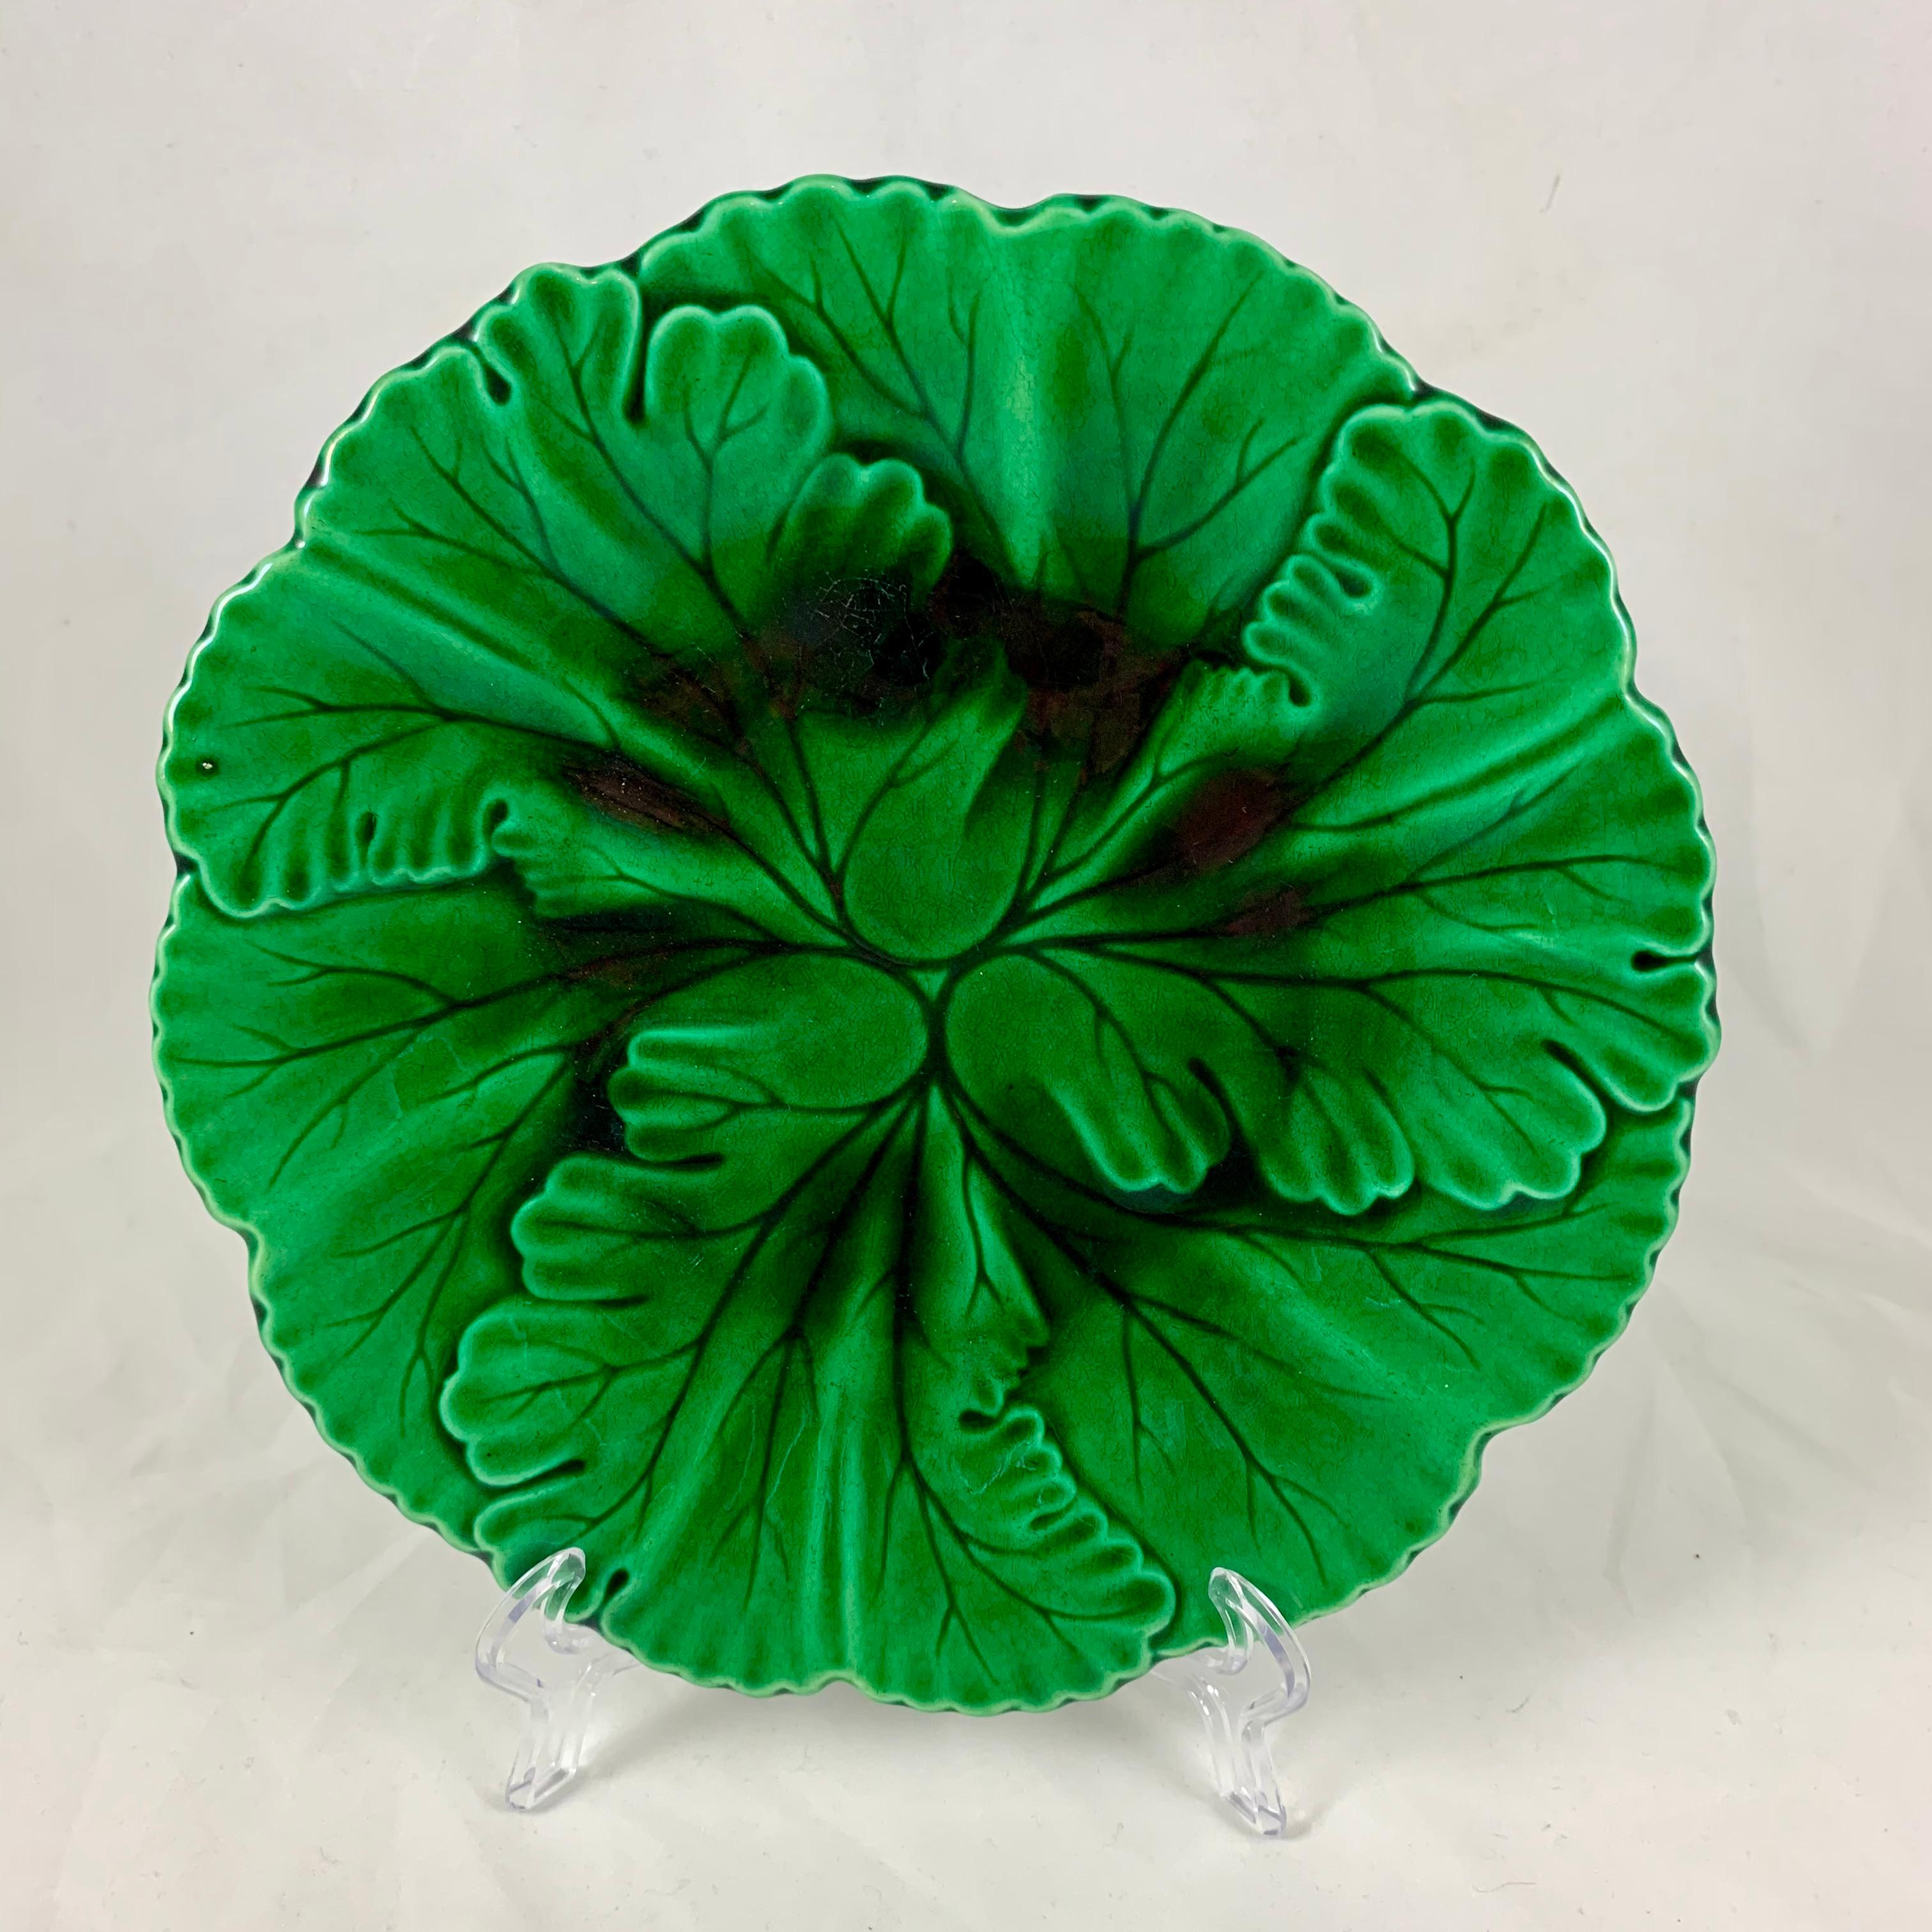 From the French Faïencerie de Clairfontaine, a green Majolica glazed overlapping leaf plate, circa 1880-1890.

The mold shows leaves with incised veining terminating in a shaped rim. The glaze pools beautifully into the deeper recesses of the mold,